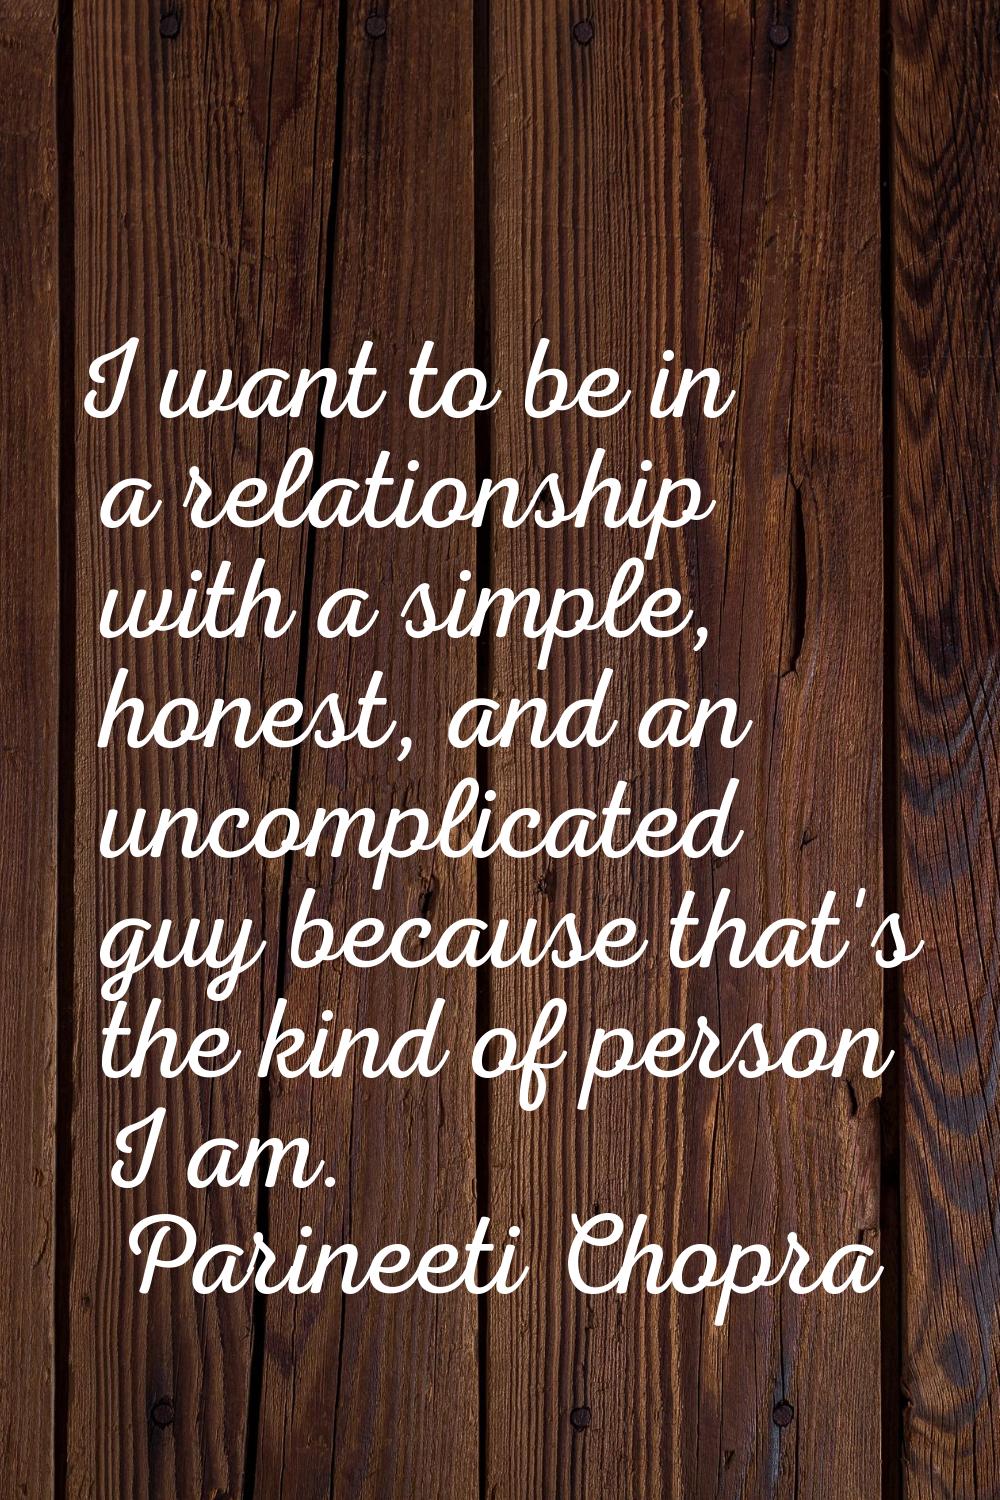 I want to be in a relationship with a simple, honest, and an uncomplicated guy because that's the k